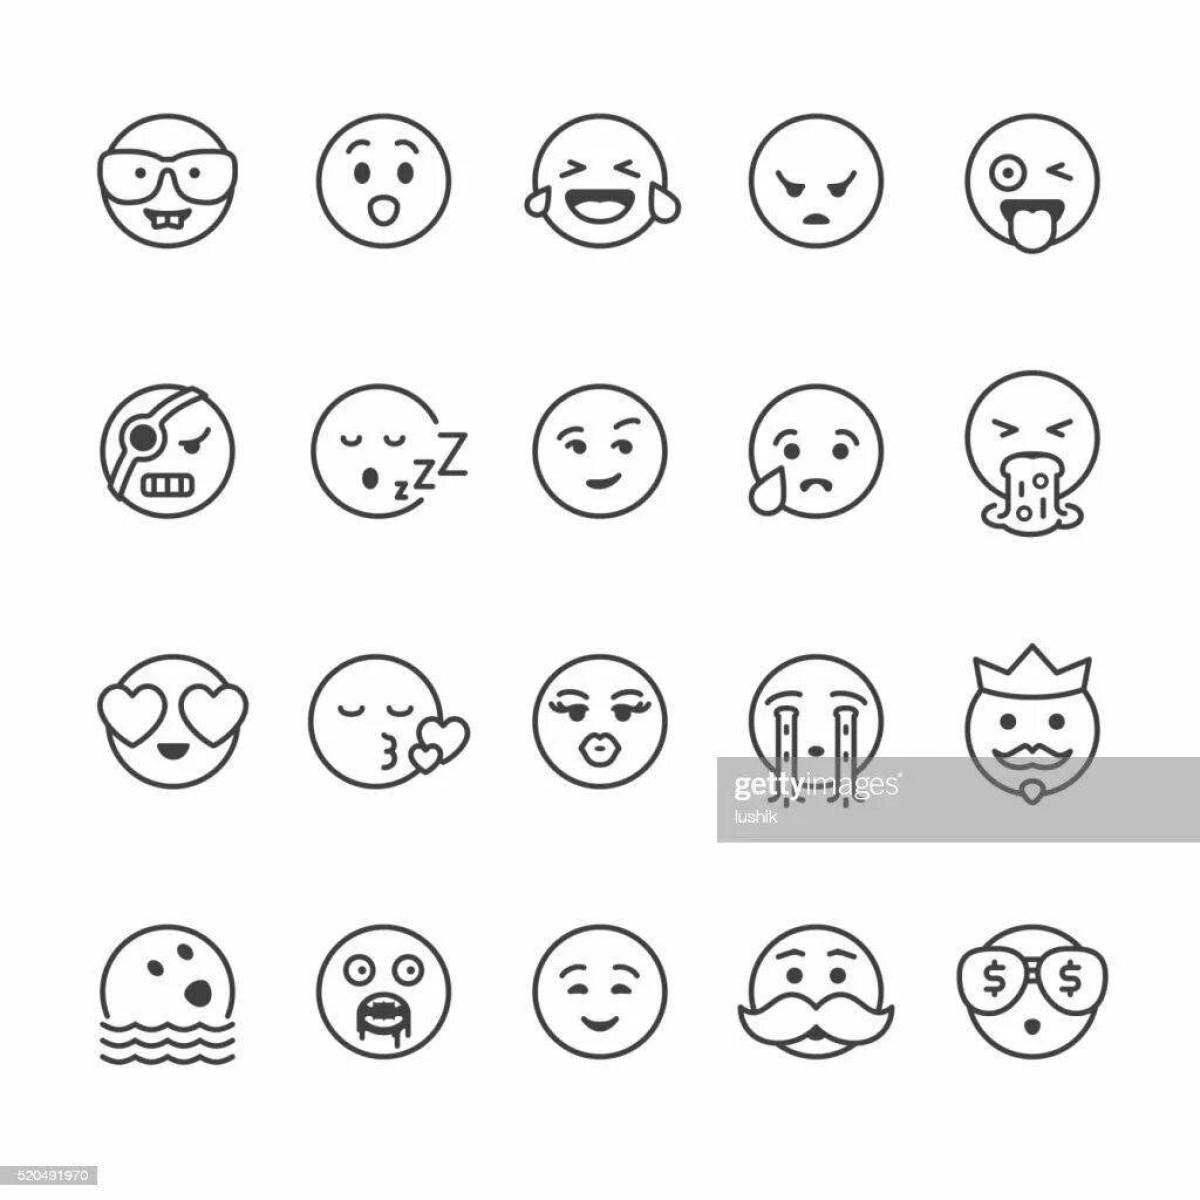 Cute coloring pages small emoticons for stickers